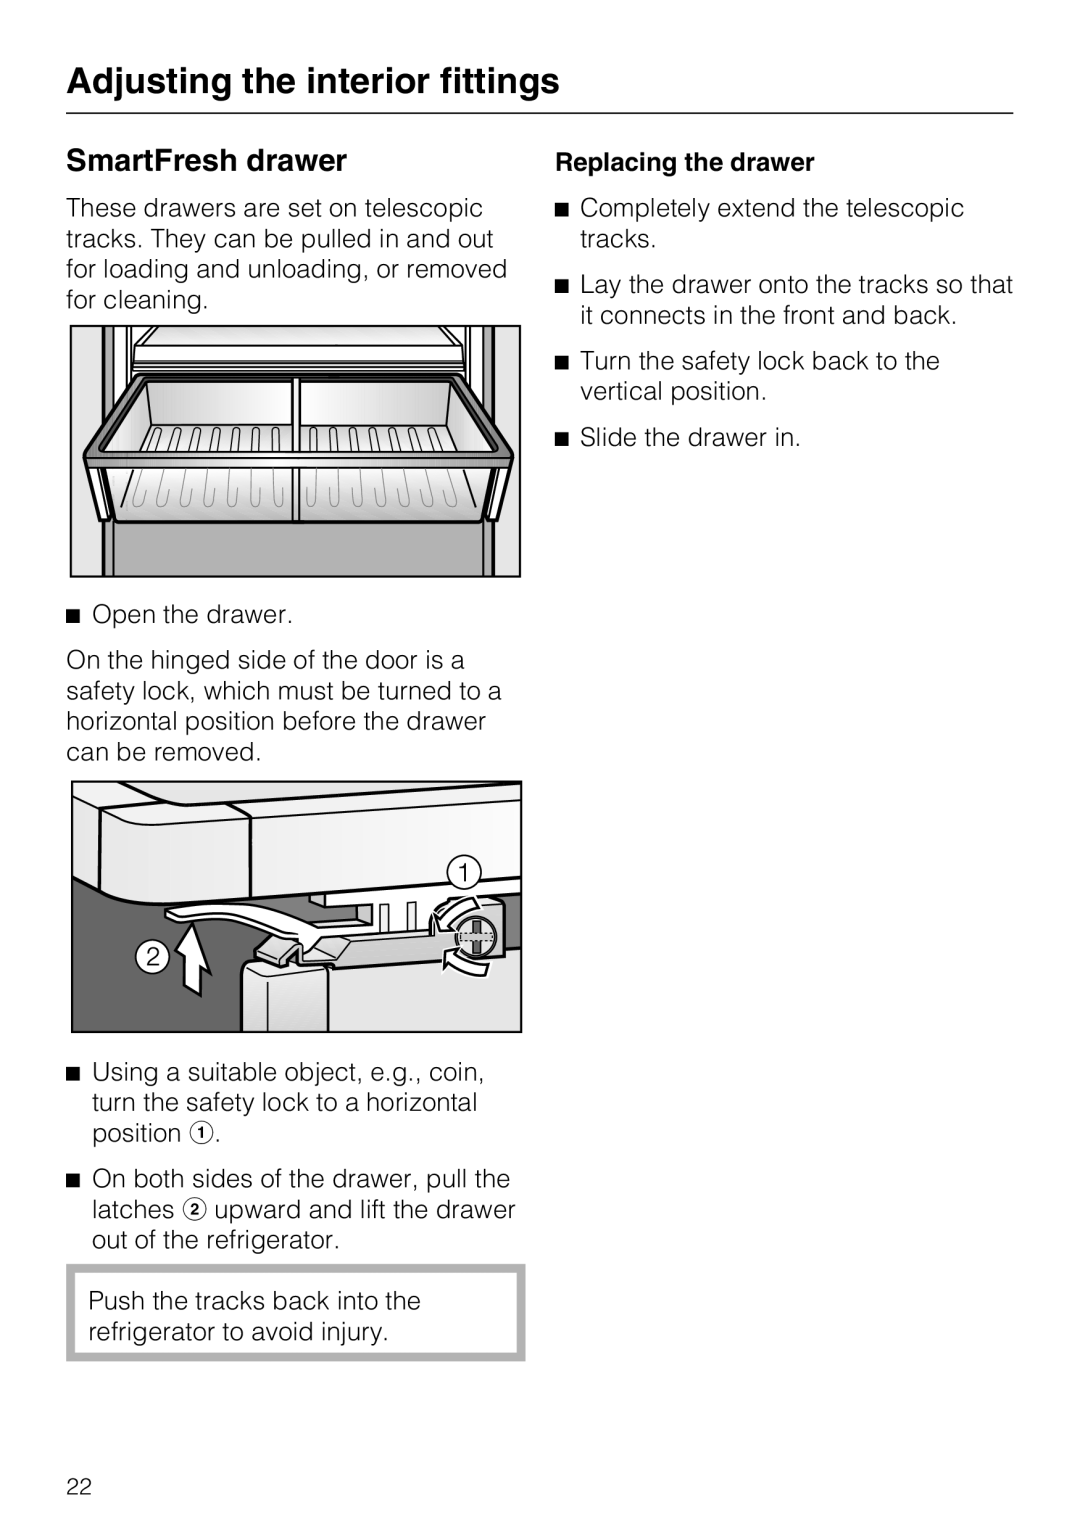 Miele 09 920 570 installation instructions SmartFresh drawer, Adjusting the interior fittings 